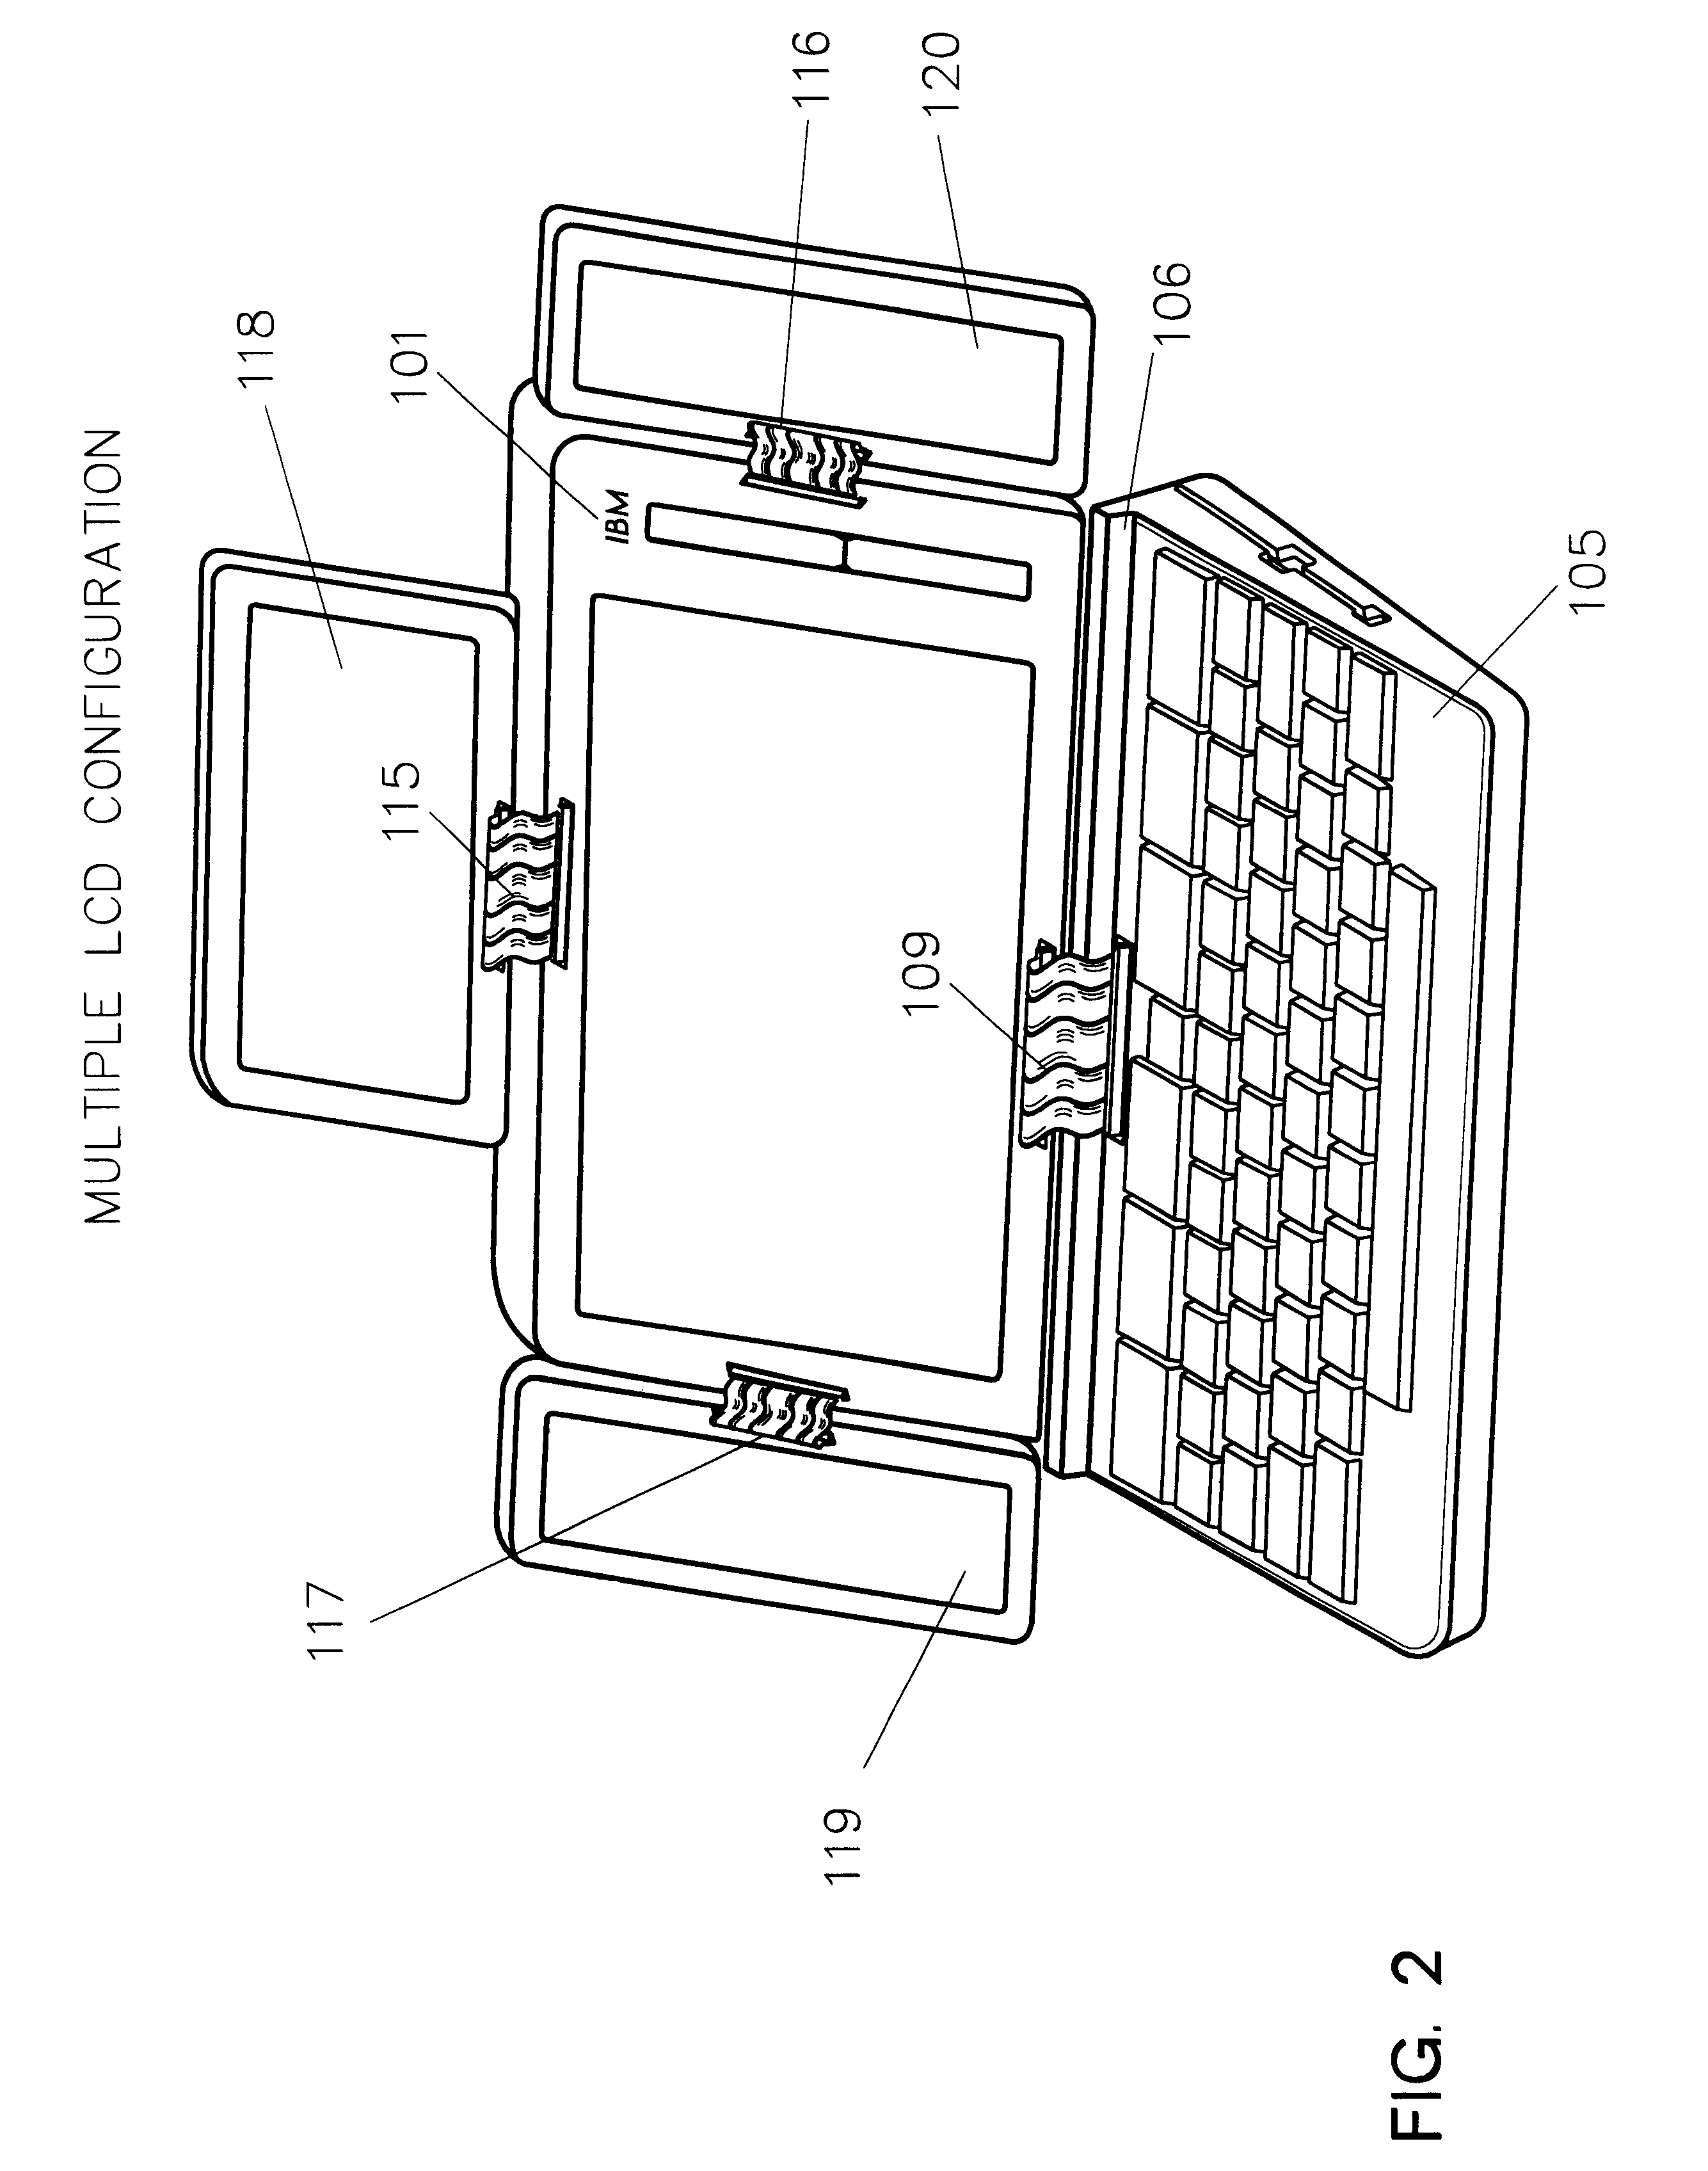 Pivotally extensible display device